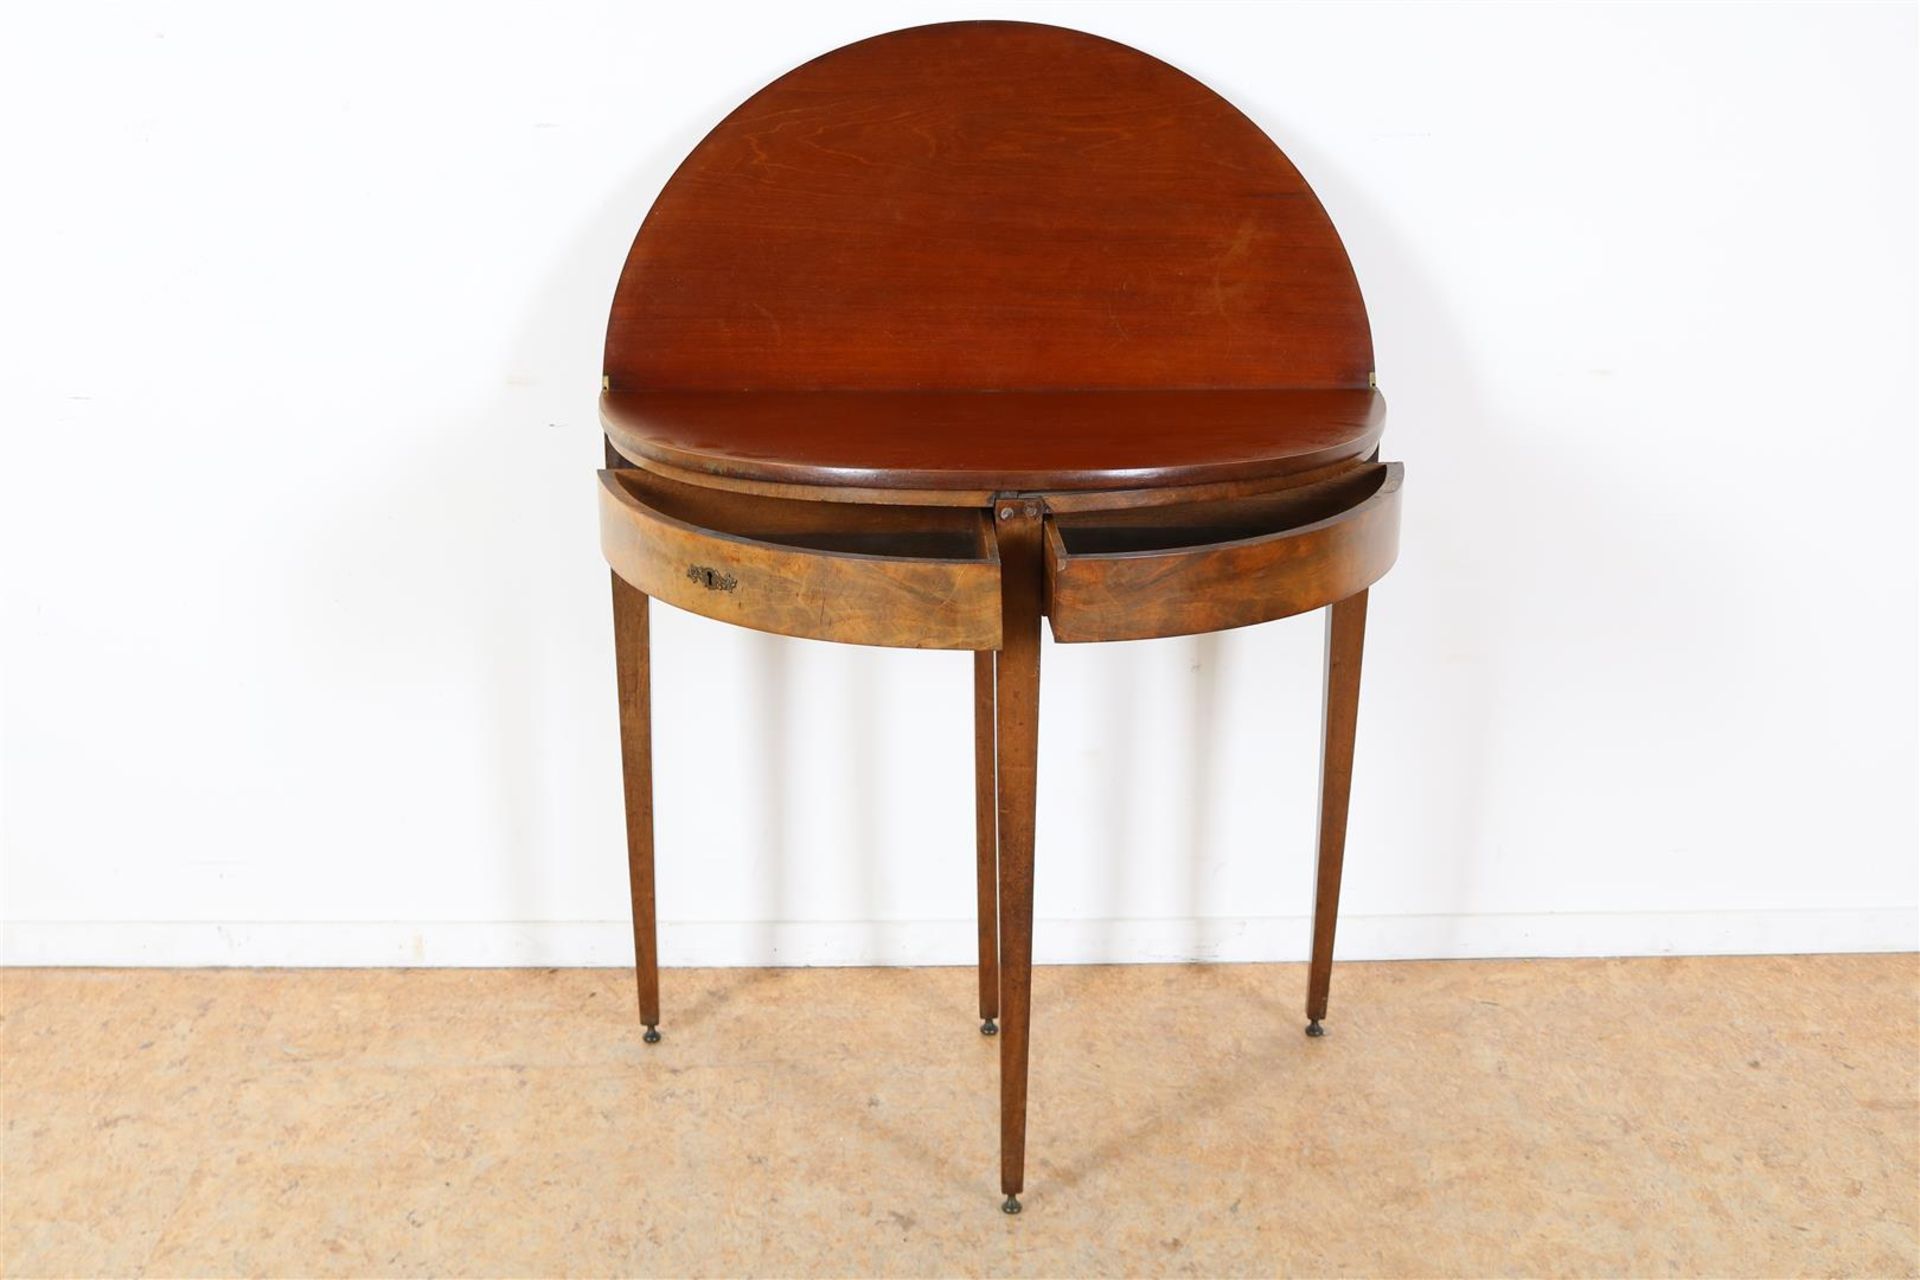 Mahogany Louis XVI style console table with 2 drawers on tapered legs, 19th century, 78 x 82 x 42 - Image 2 of 5